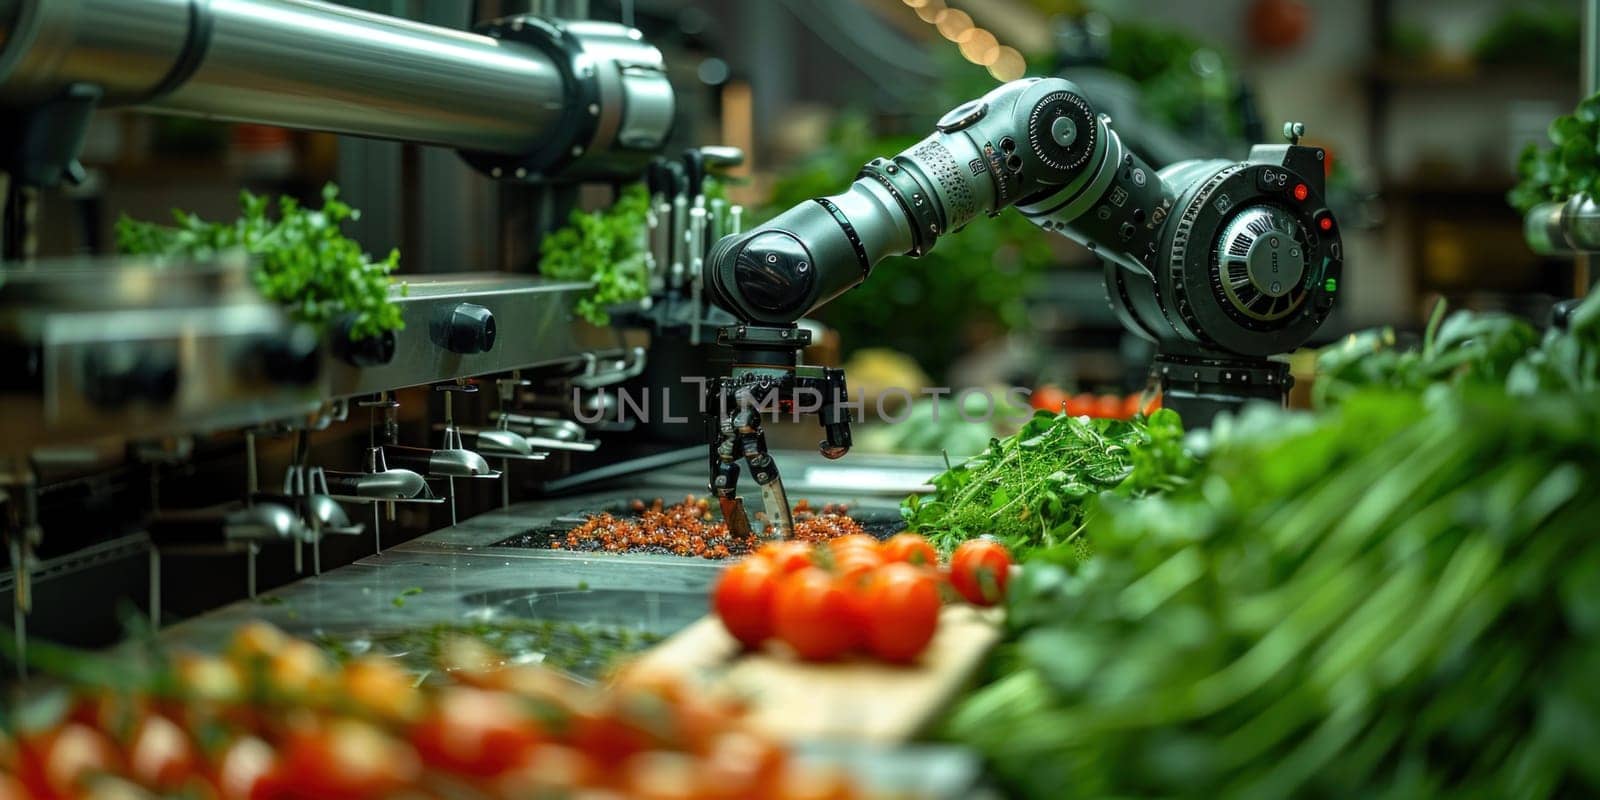 A robot efficiently sorting various vegetables on a production line in a factory setting.